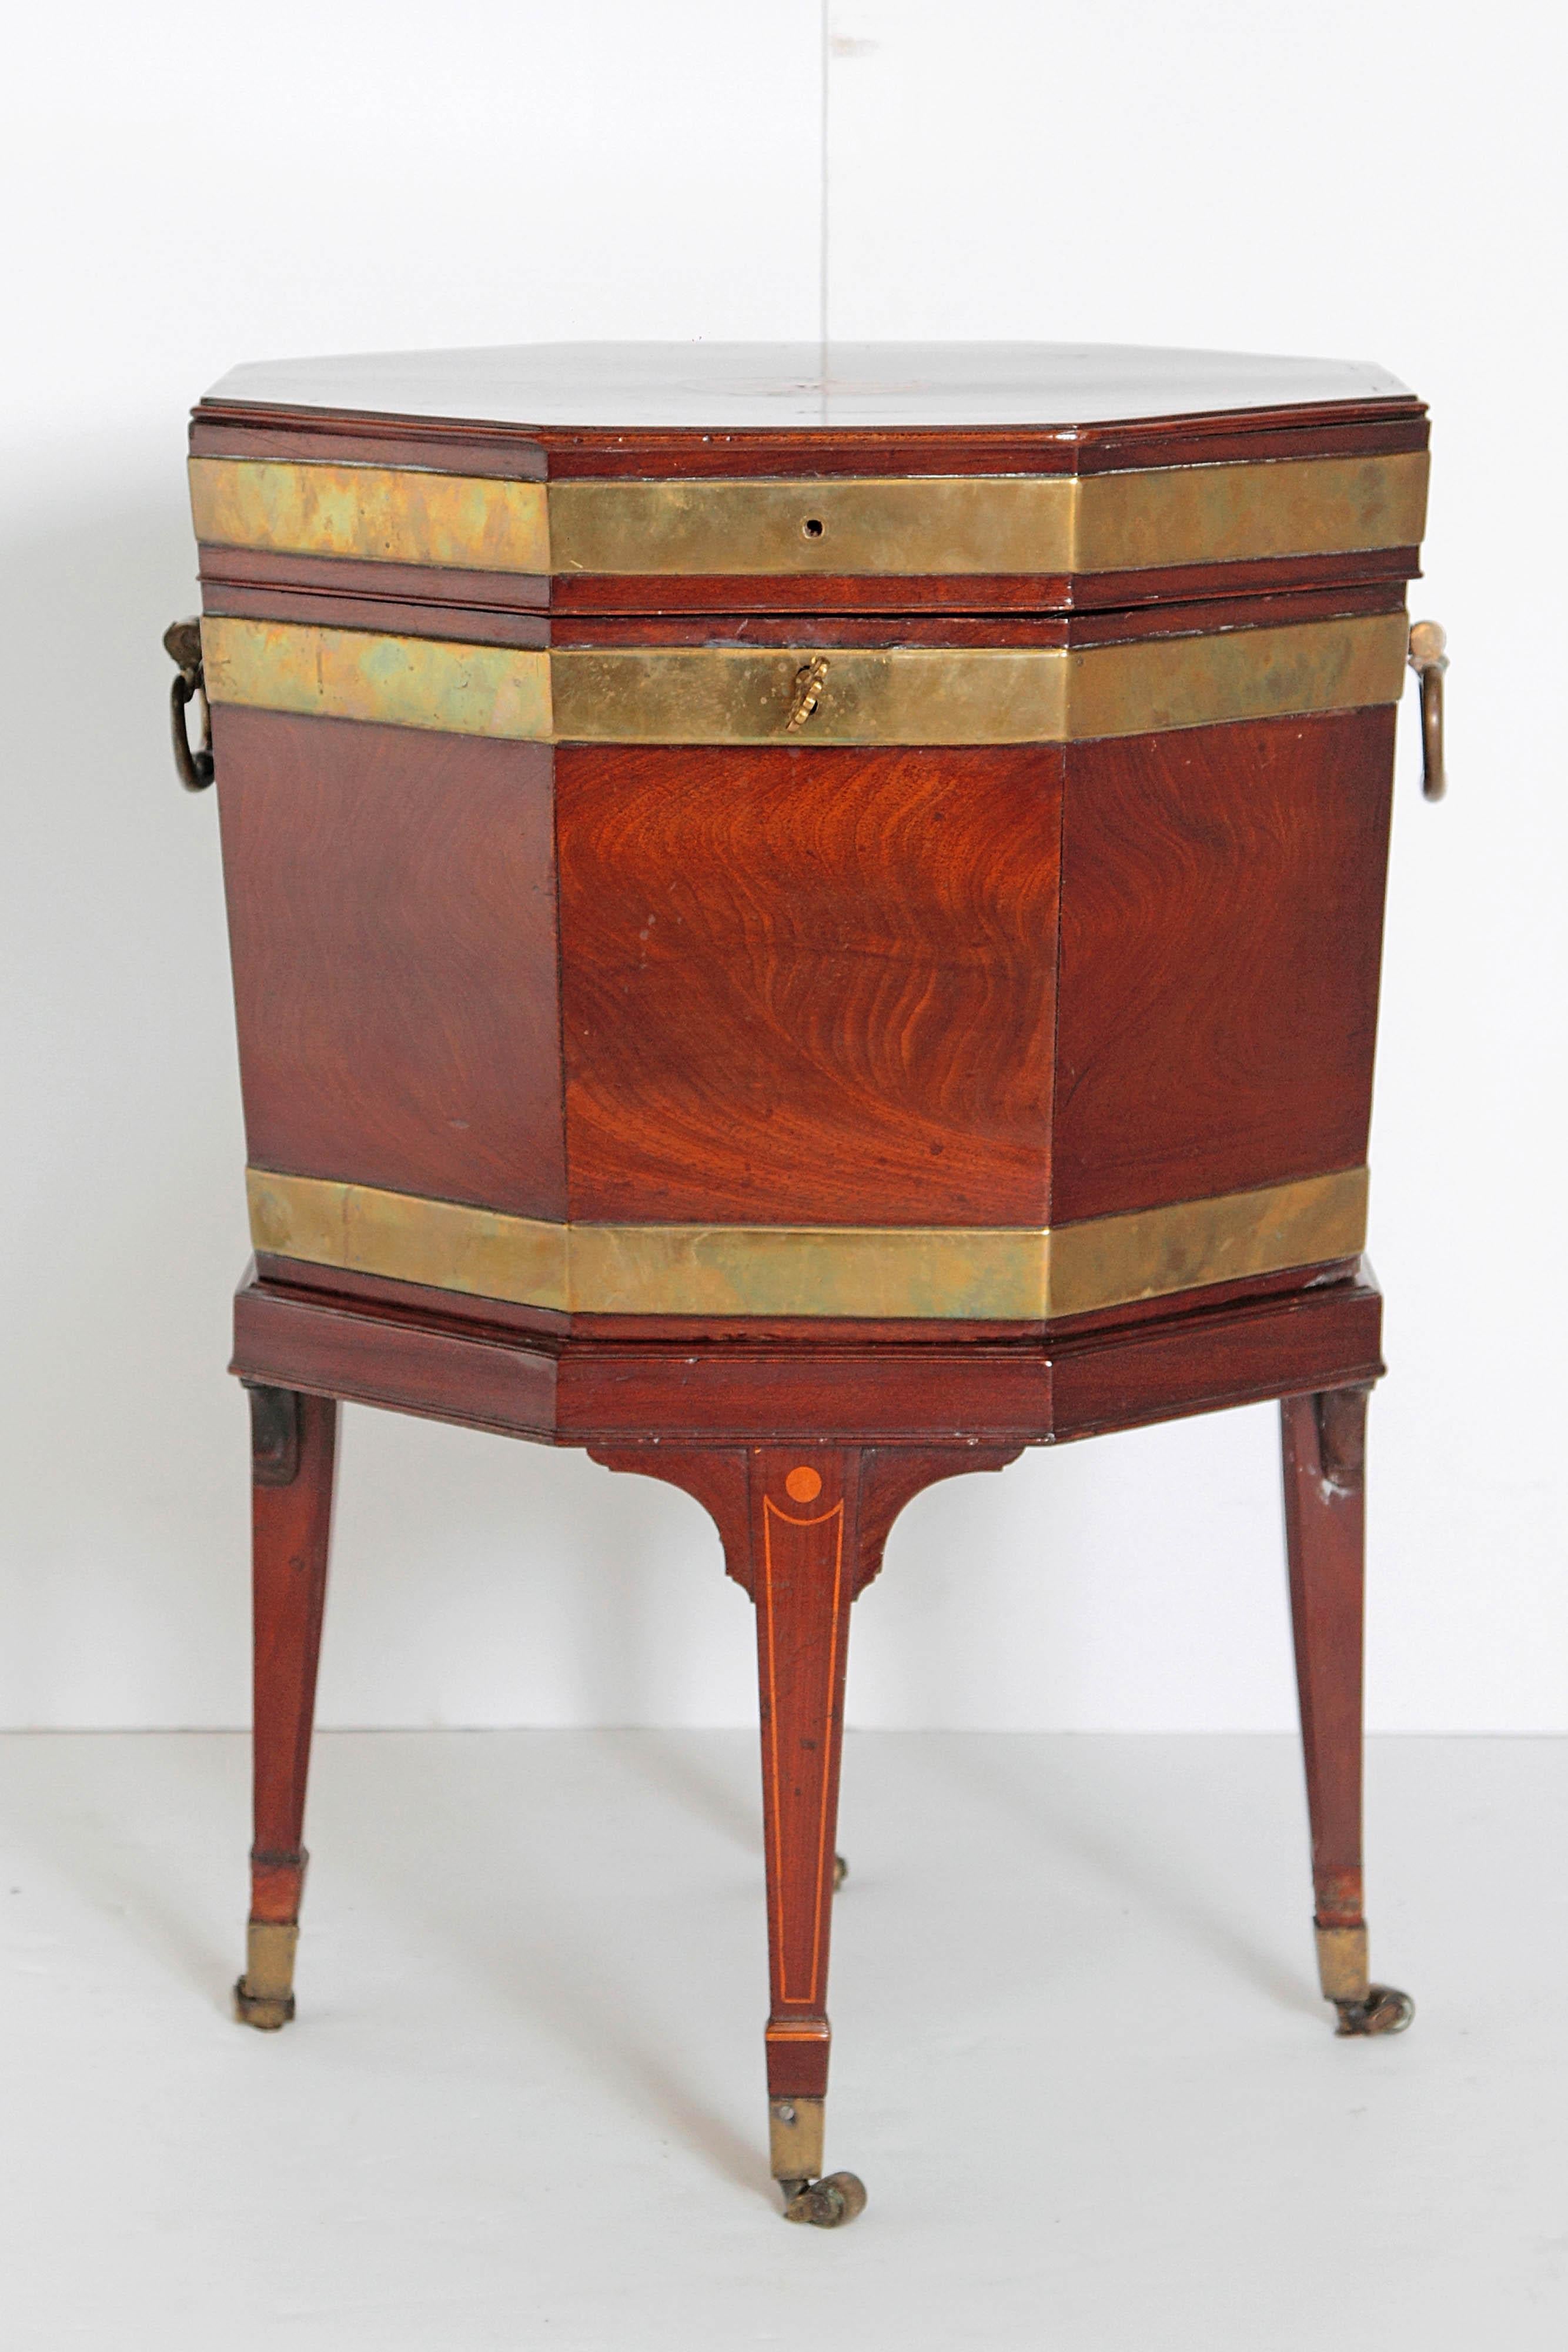 A George III brass bound mahogany octagonal cellarette/wine cooler on satinwood line inlaid tapering supports terminating in brass cups and casters. The octagon shape gives this piece its rare uniqueness, along with the brass bands, the large drop